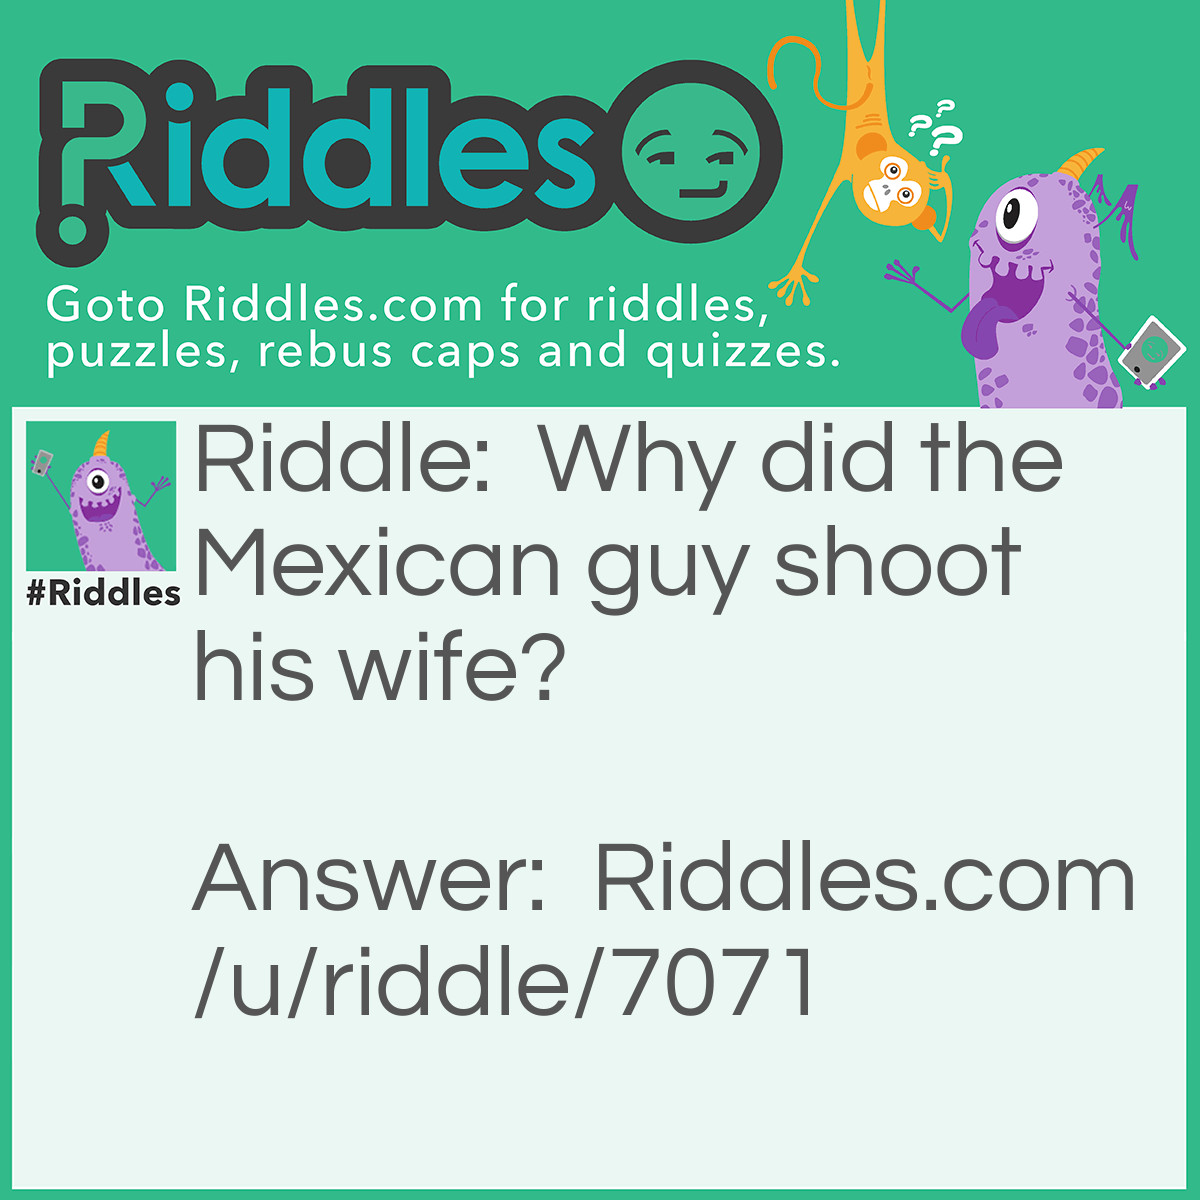 Riddle: Why did the Mexican guy shoot his wife? Answer: Tequila.